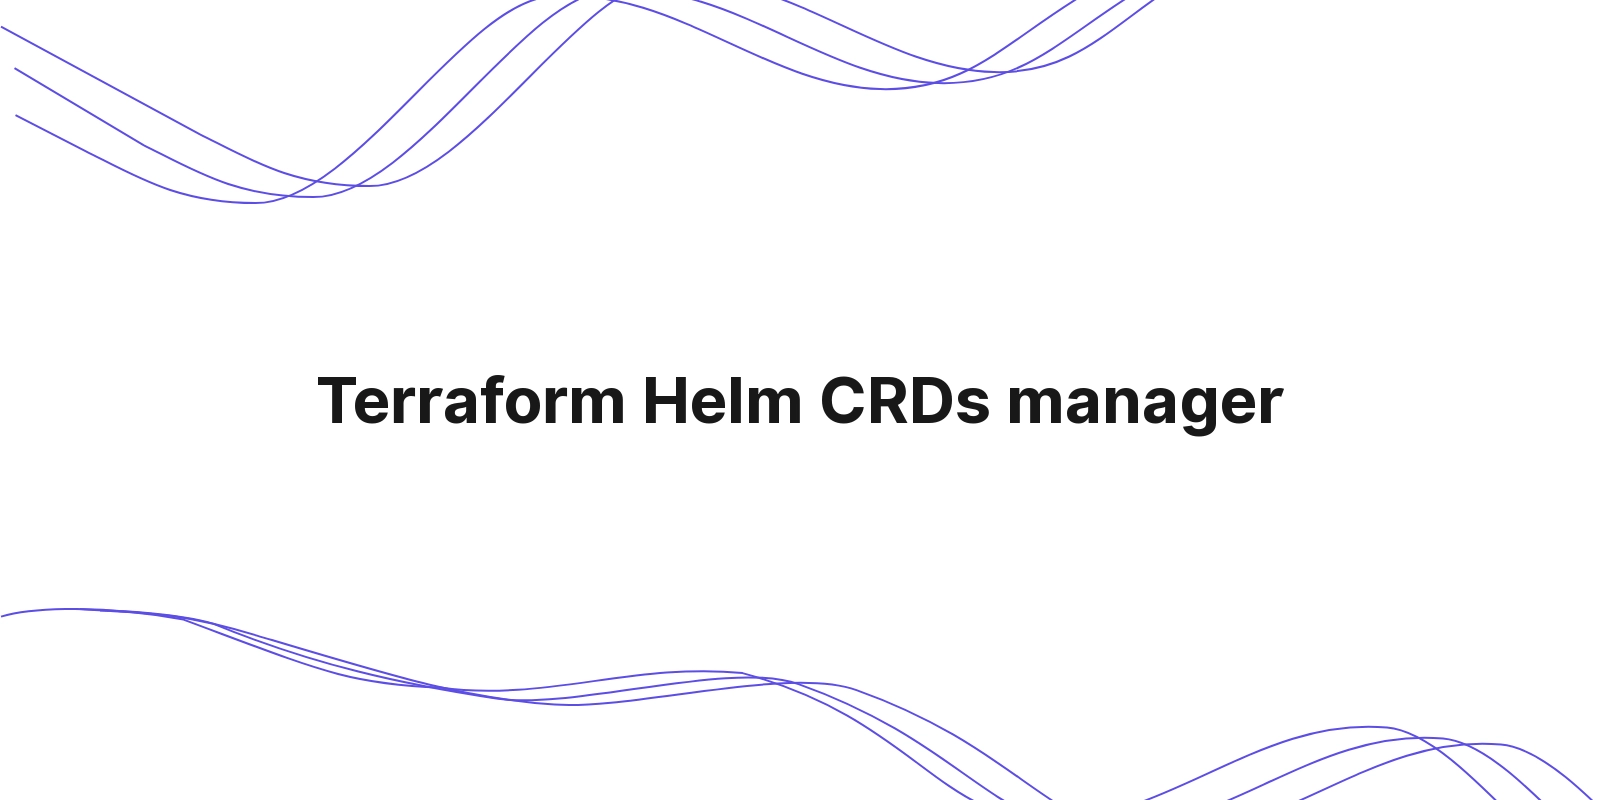 Managing Helm CRDs with Terraform